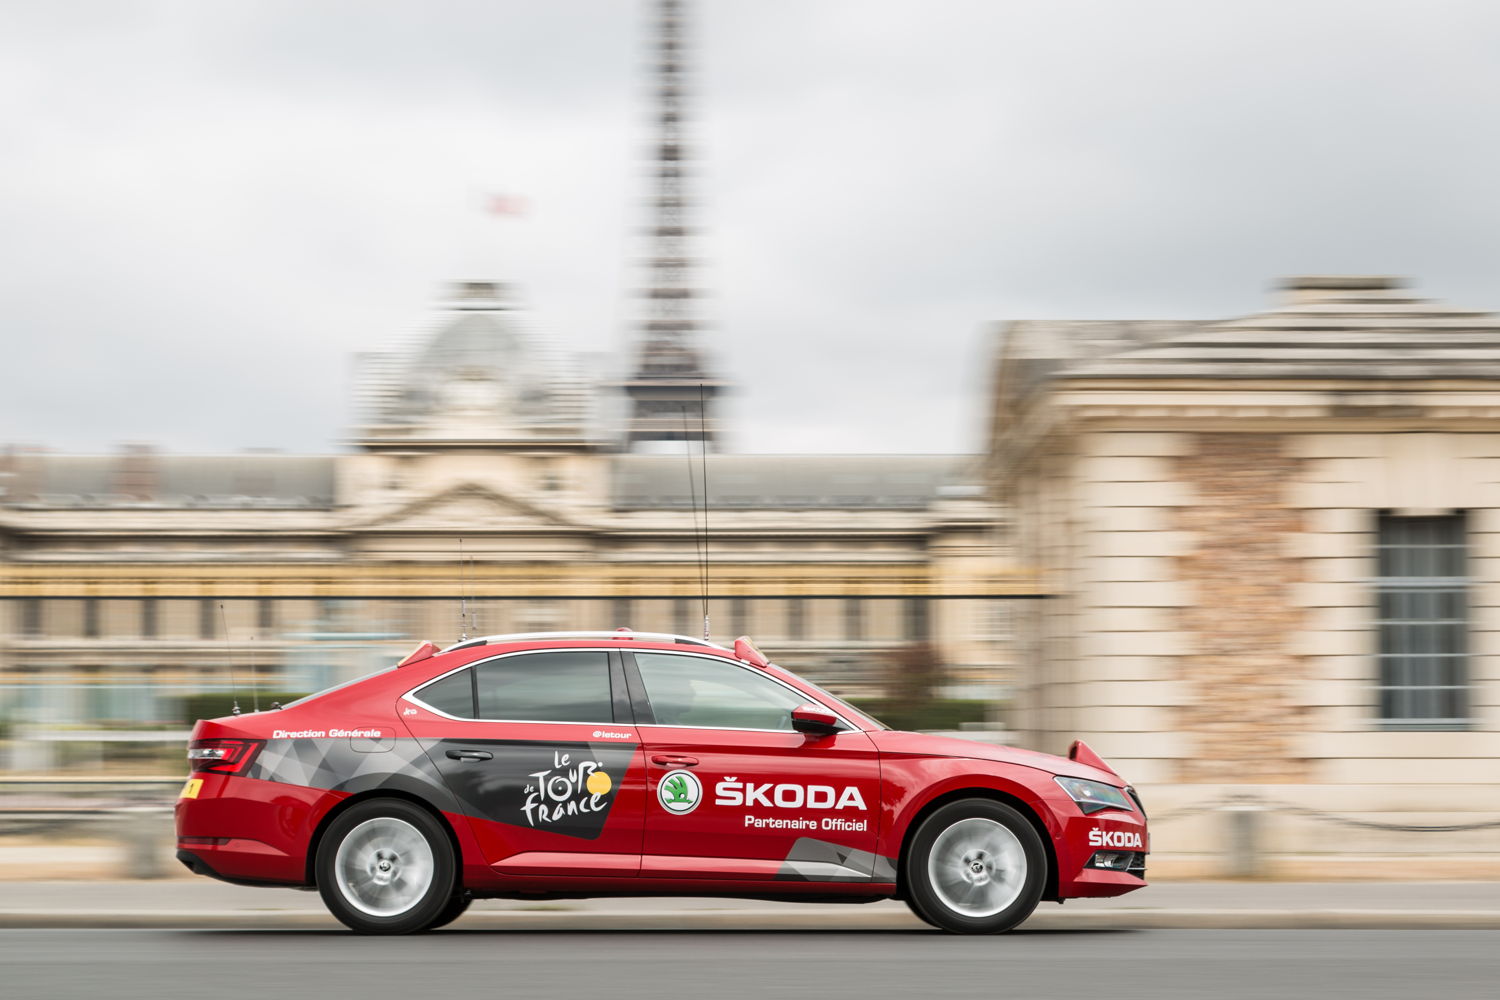 Once again, ŠKODA will be sending a vehicle fleet to the
cycling classic this year. The ŠKODA SUPERB will be
serving as the ‘Red Car’ – a mobile command centre for
Tour Director Christian Prudhomme.